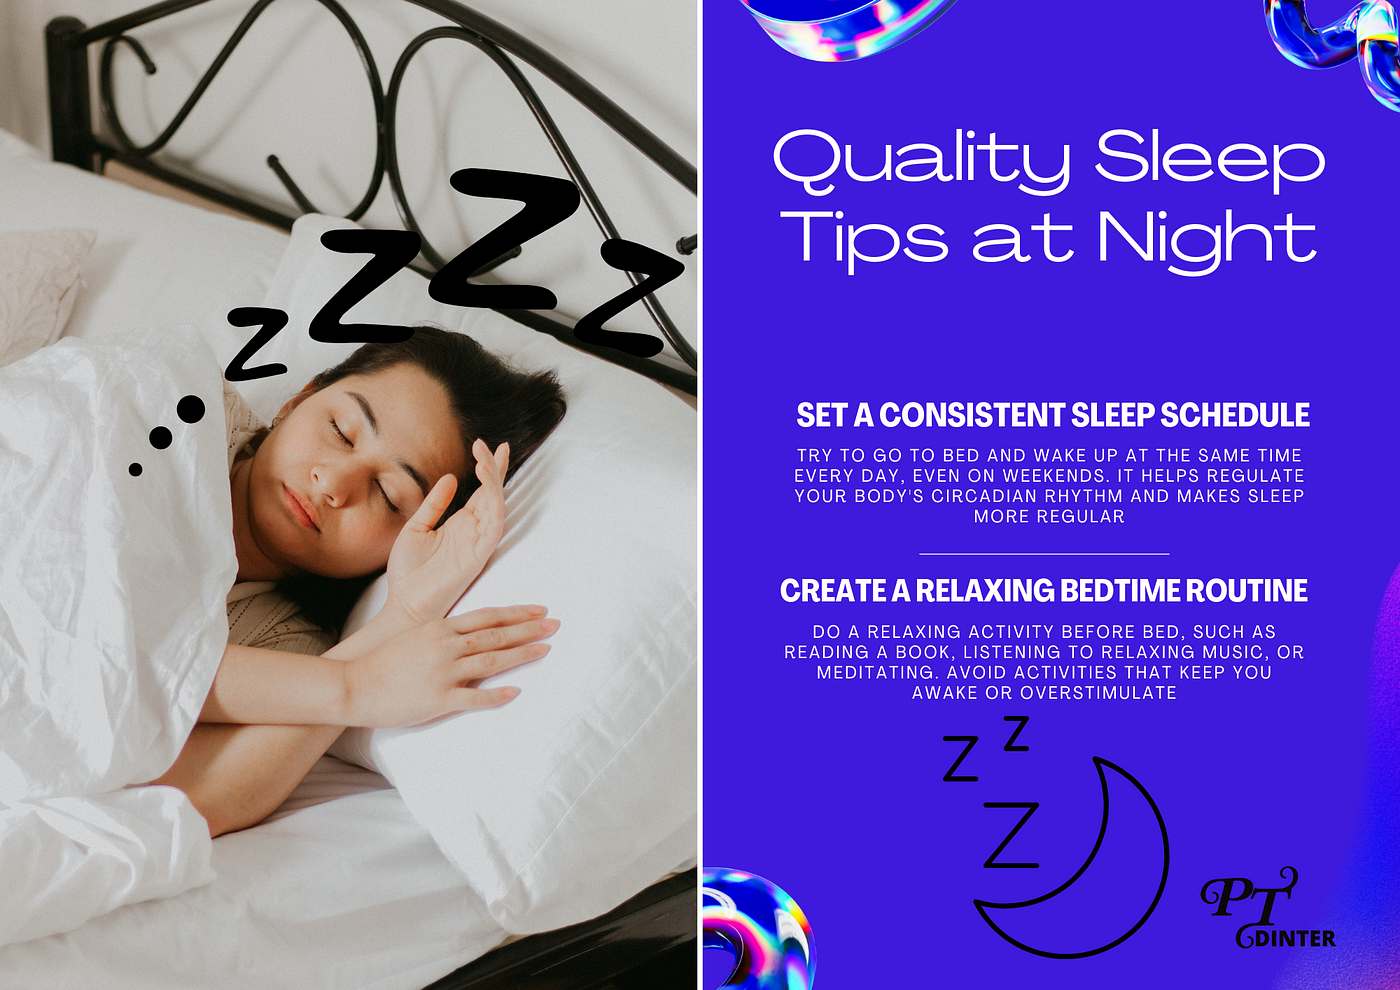 Sleep hygiene — The key to a restful night's sleep, by Peter Dinter